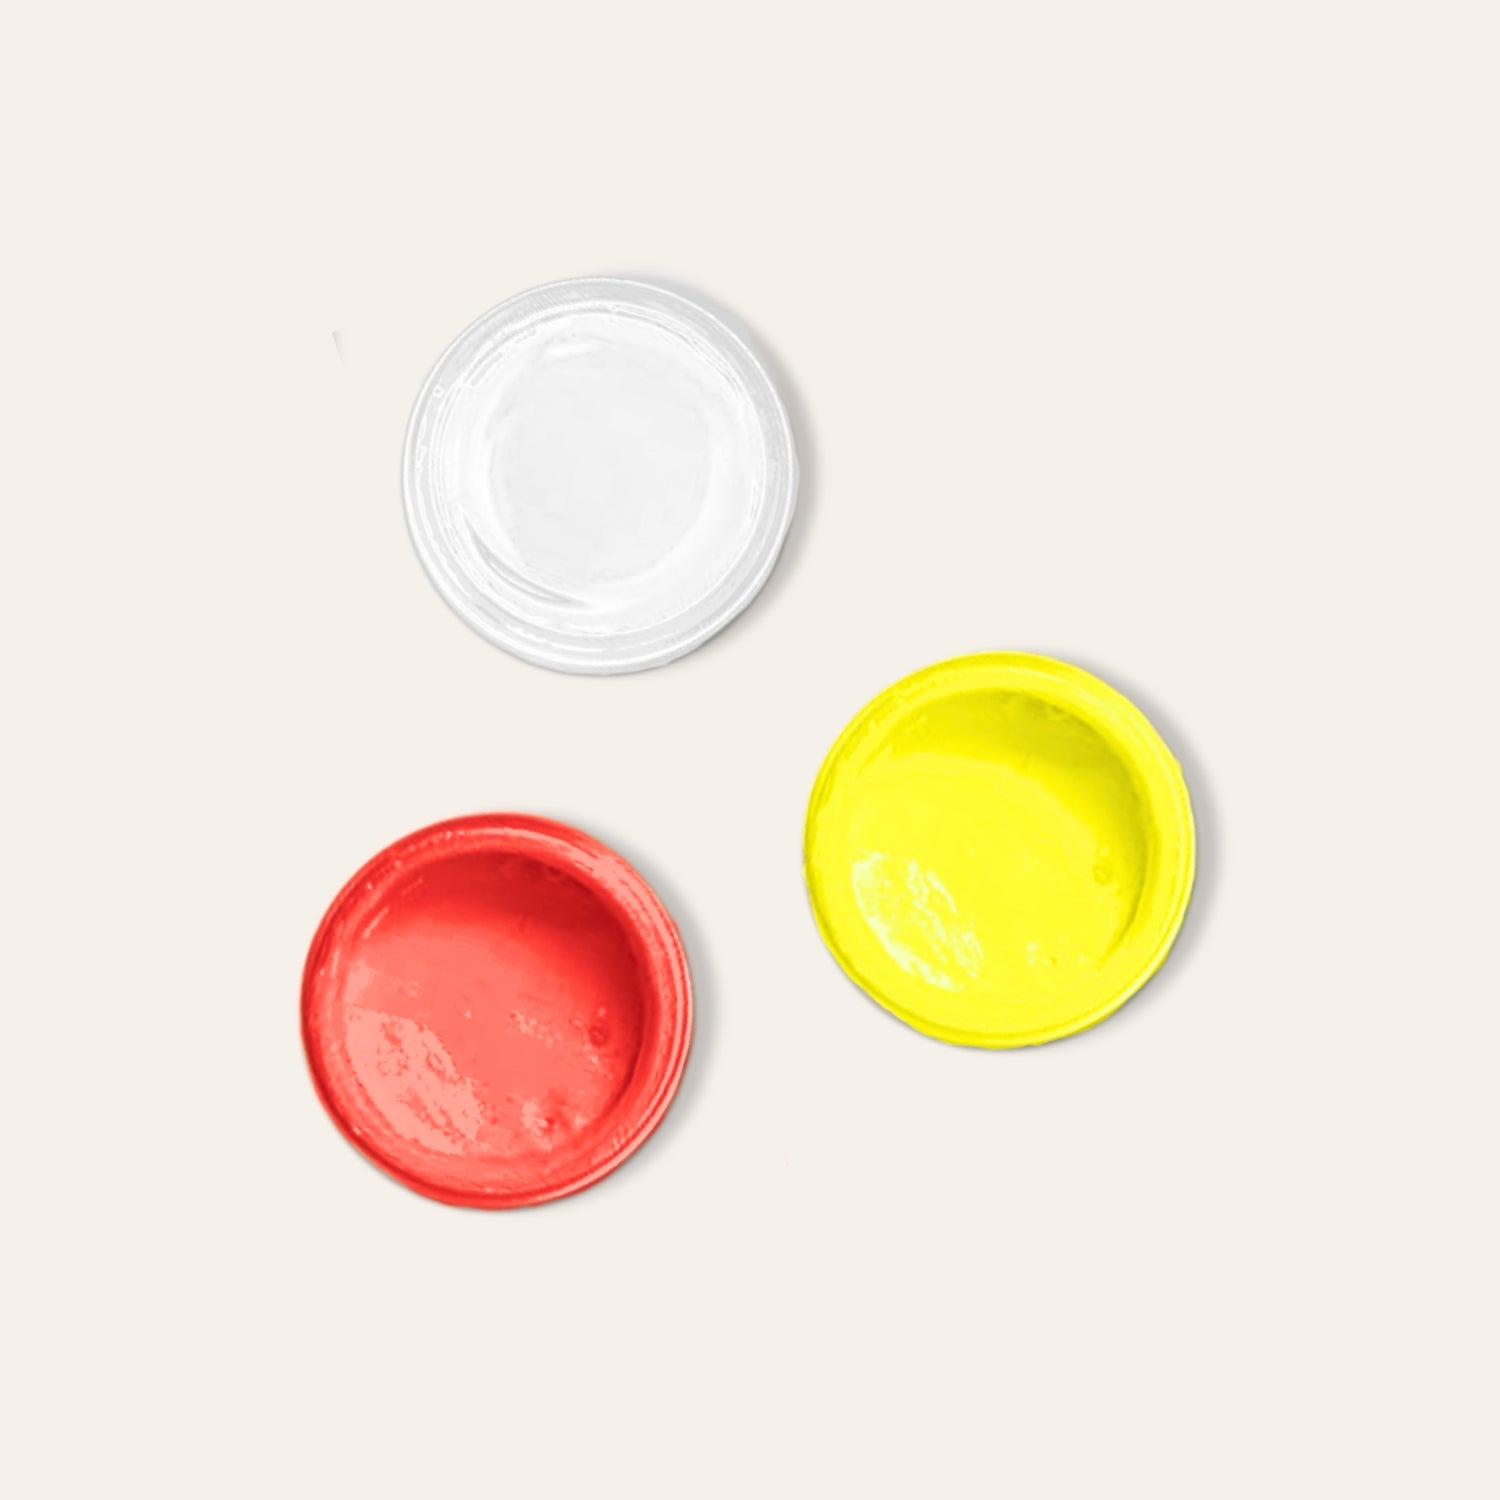 Air dry clay paint pots - white, red, yellow.